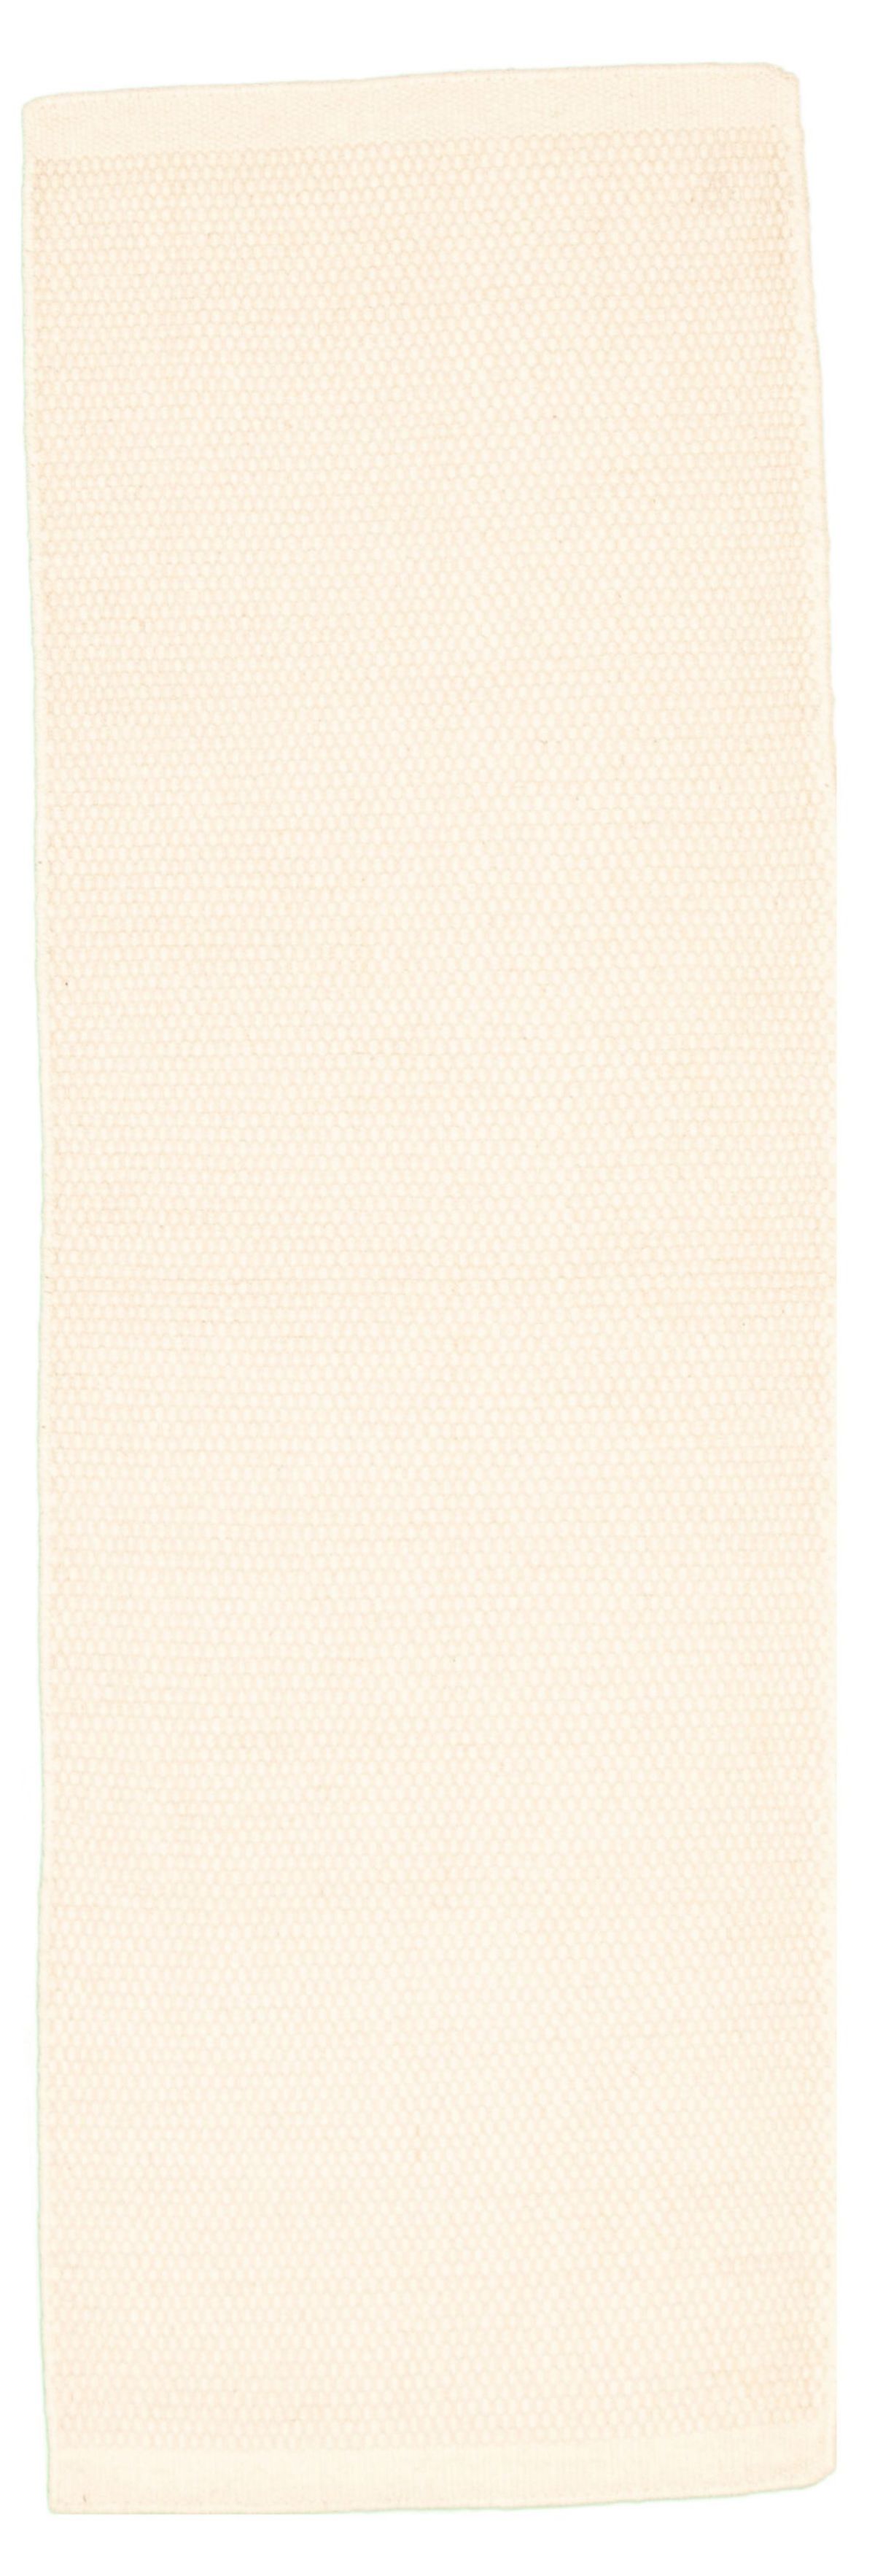 Hand loomed Bungalow CR Cream Wool Dhurrie 2'9" x 8'4" Size: 2'9" x 8'4"  